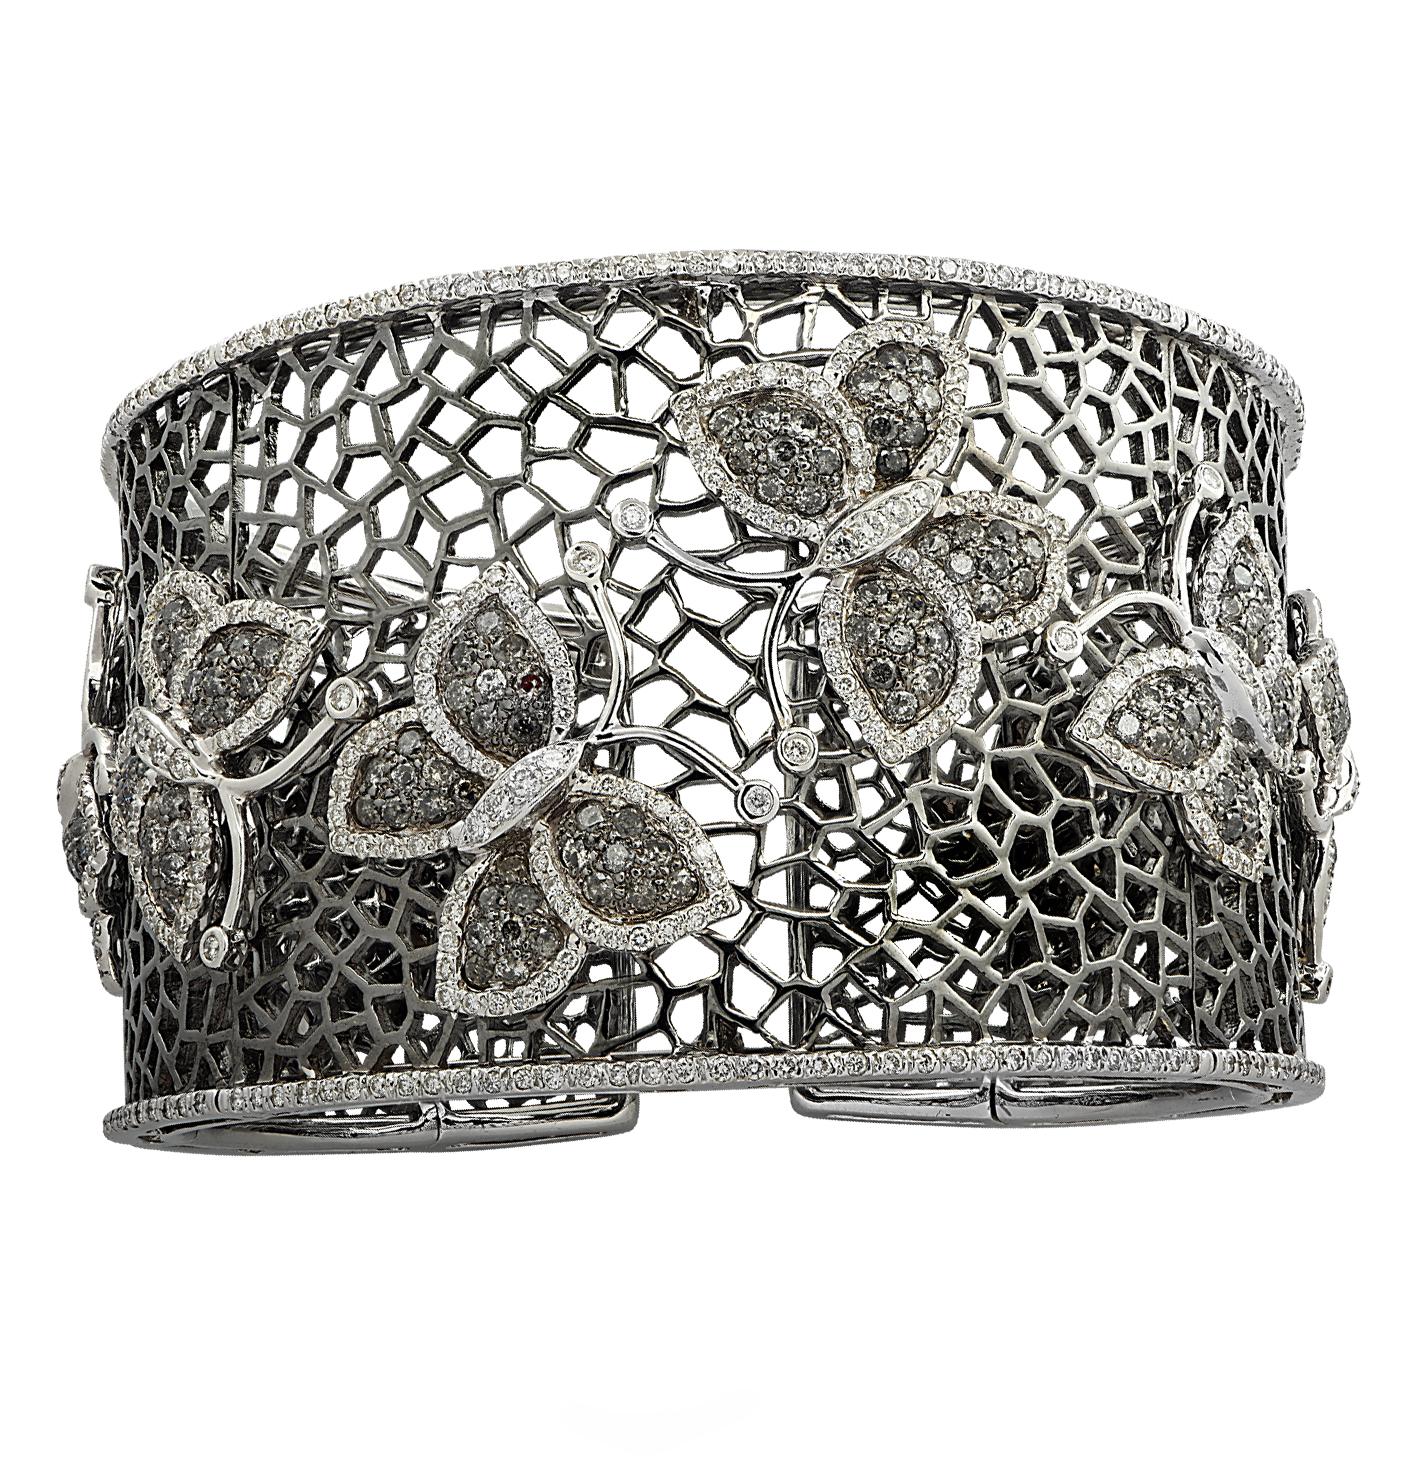 Delightful butterfly cuff bangle bracelet crafted in 18 karat white gold with black rhodium, featuring 780 round brilliant cut diamonds weighing approximately 7.66 carats total, G-H color, I clarity. Eight enchanting diamond encrusted butterflies